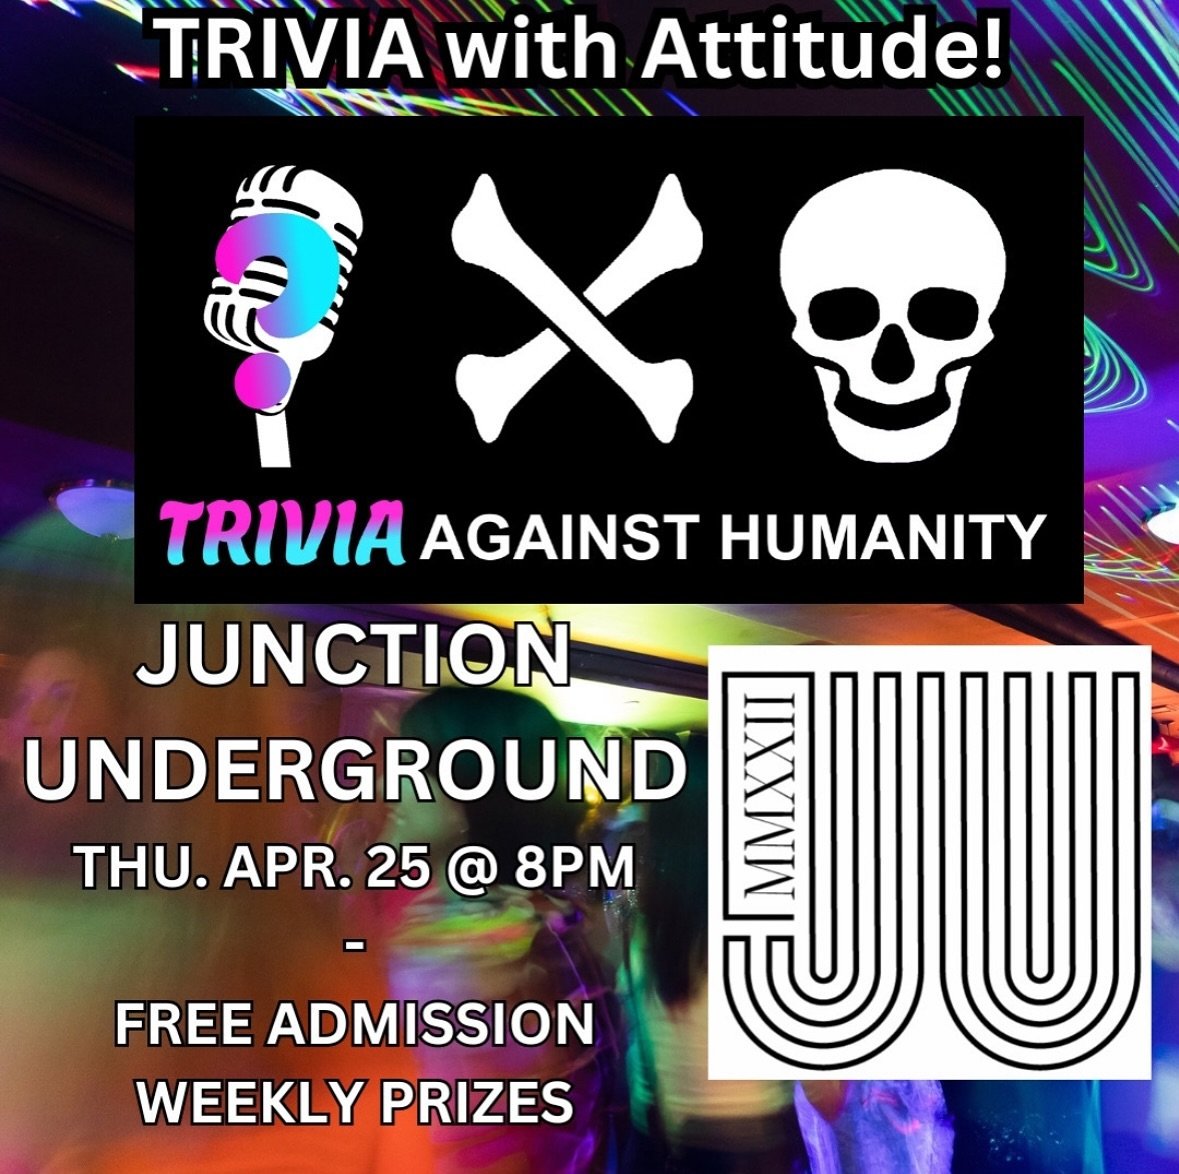 Thur Apr 25th🌟 Exciting News! 🌟 Gather your squad because we&rsquo;re launching a brand new Trivia Night at Junction Underground! 🎉 Join us Thursday April 25th at 8pm for a darkly hilarious twist on trivia, featuring jokes against humanity&rsquo;s